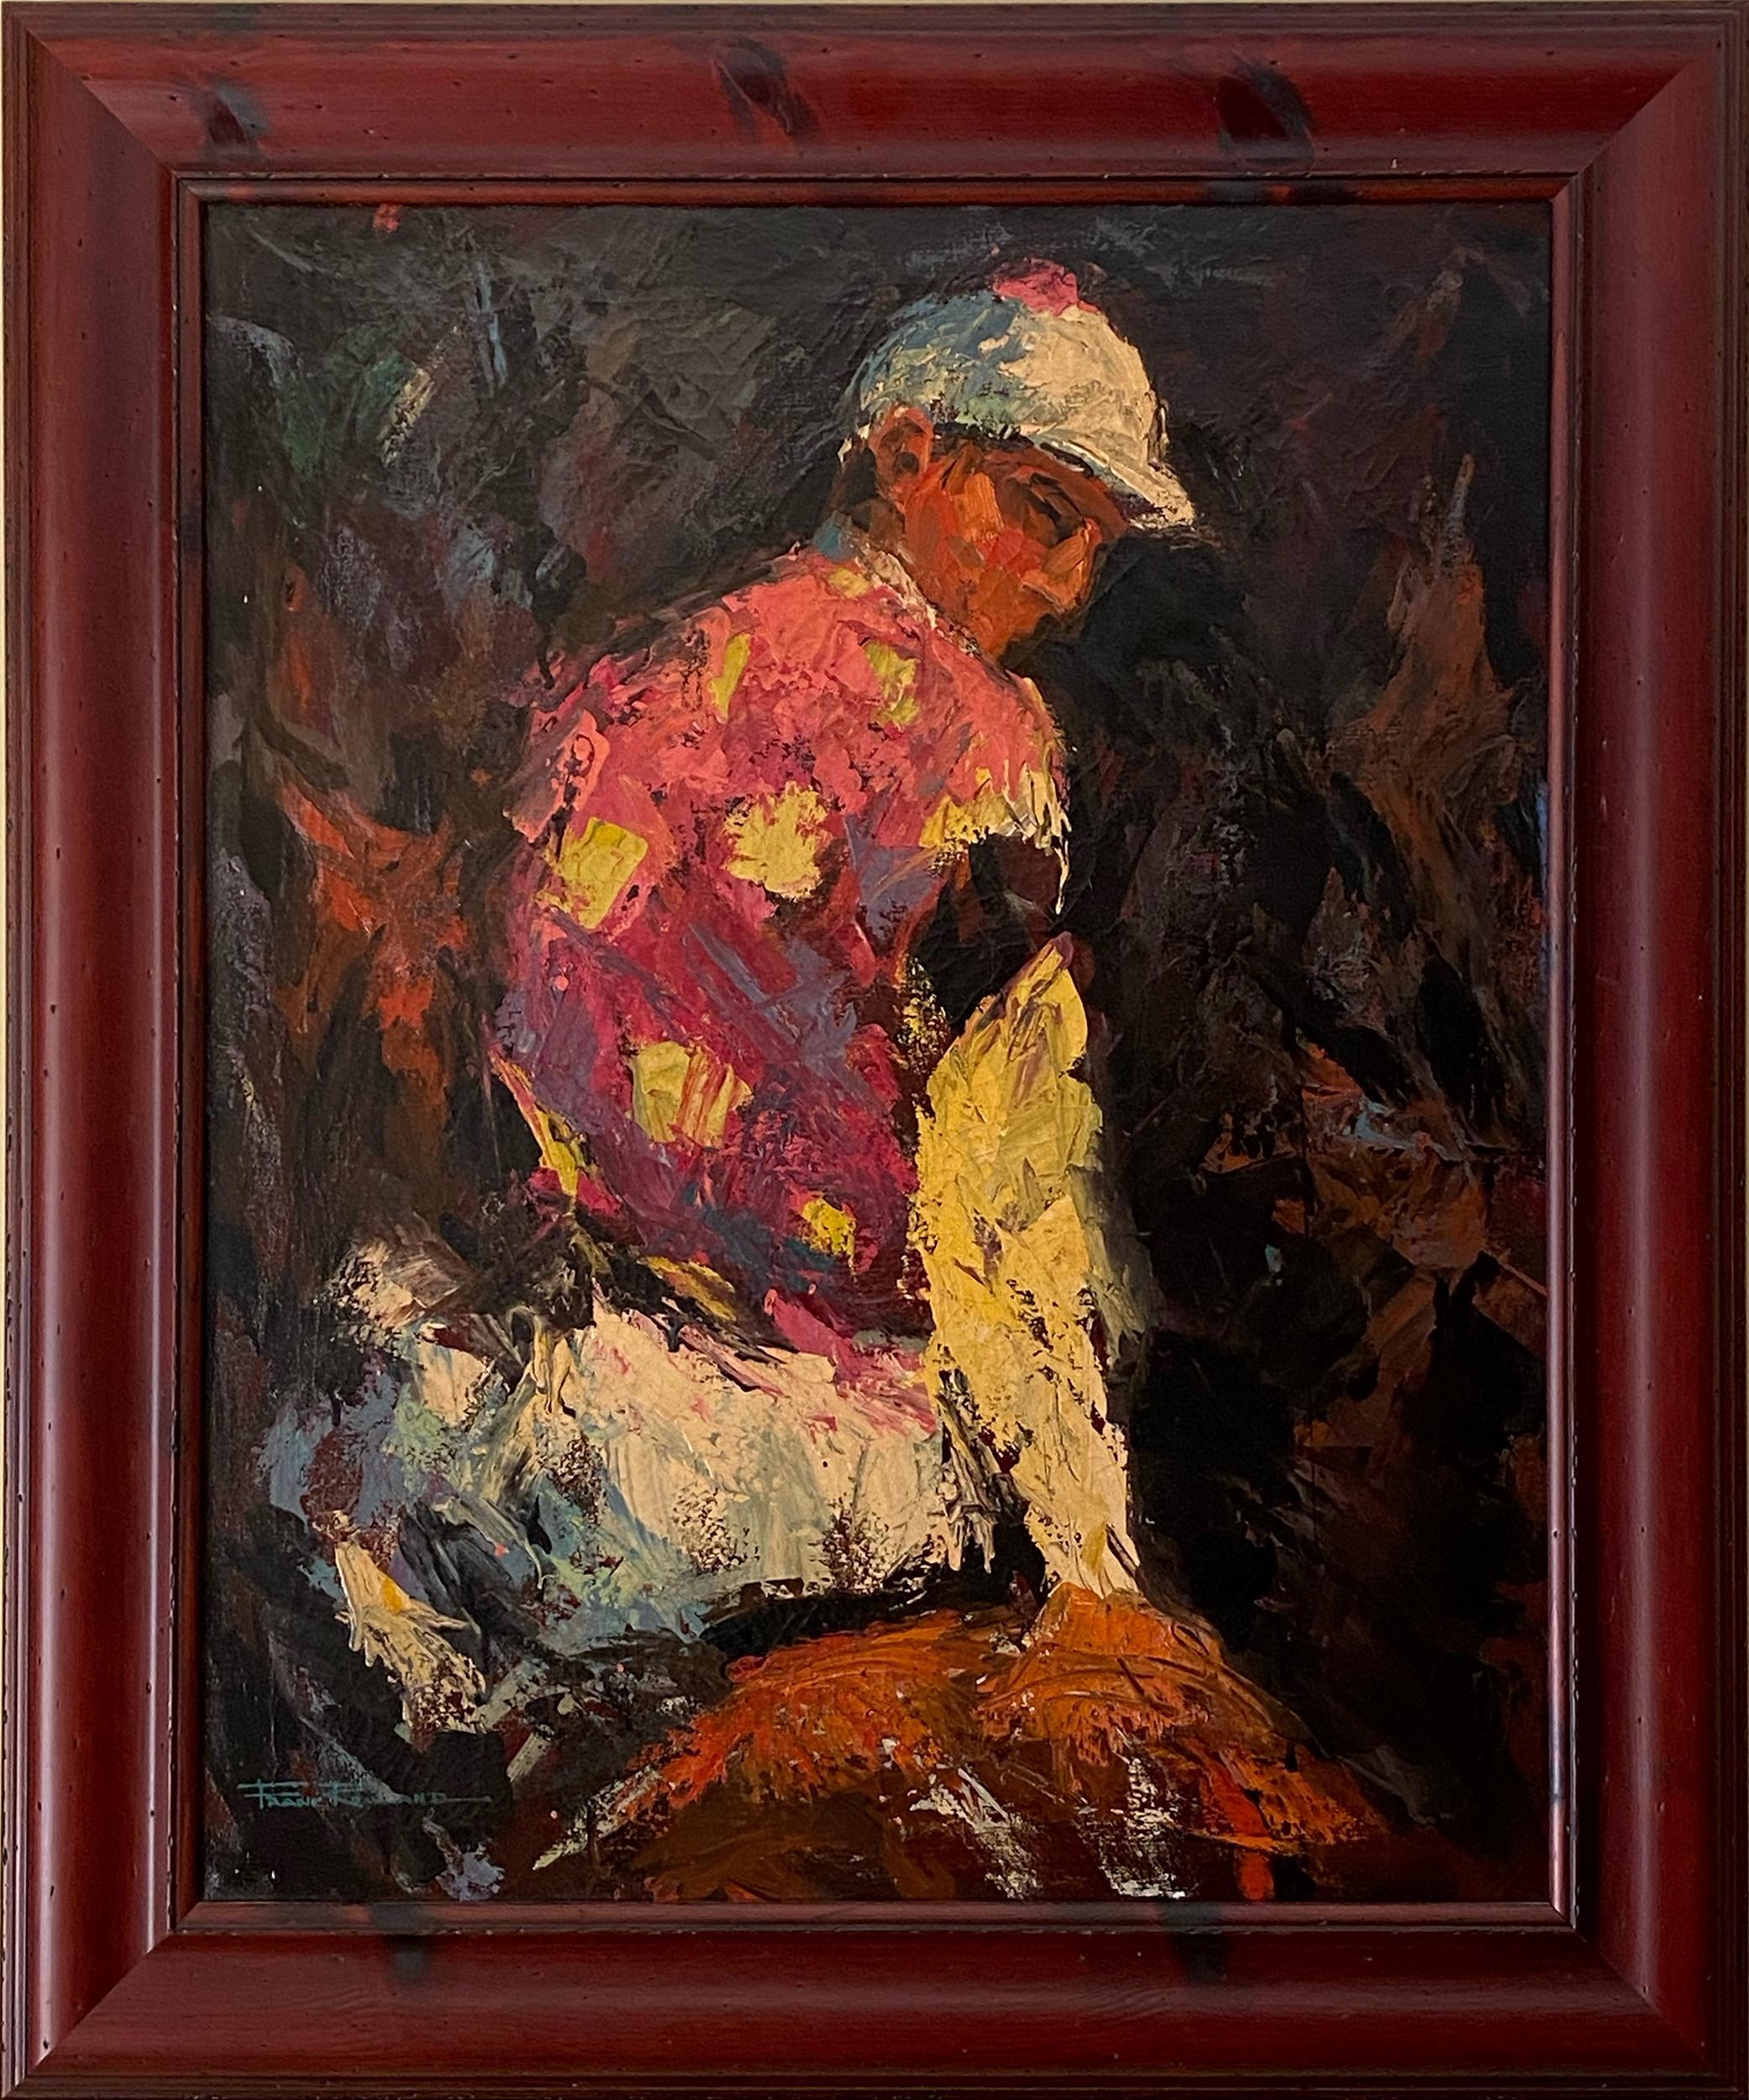 A painting of a jockey in a red shirt riding a horse as seen from behind. The composition is cropped fairly close, cutting off everything but the rear of the horse. This piece is nicely framed and features a signature by the artist on the